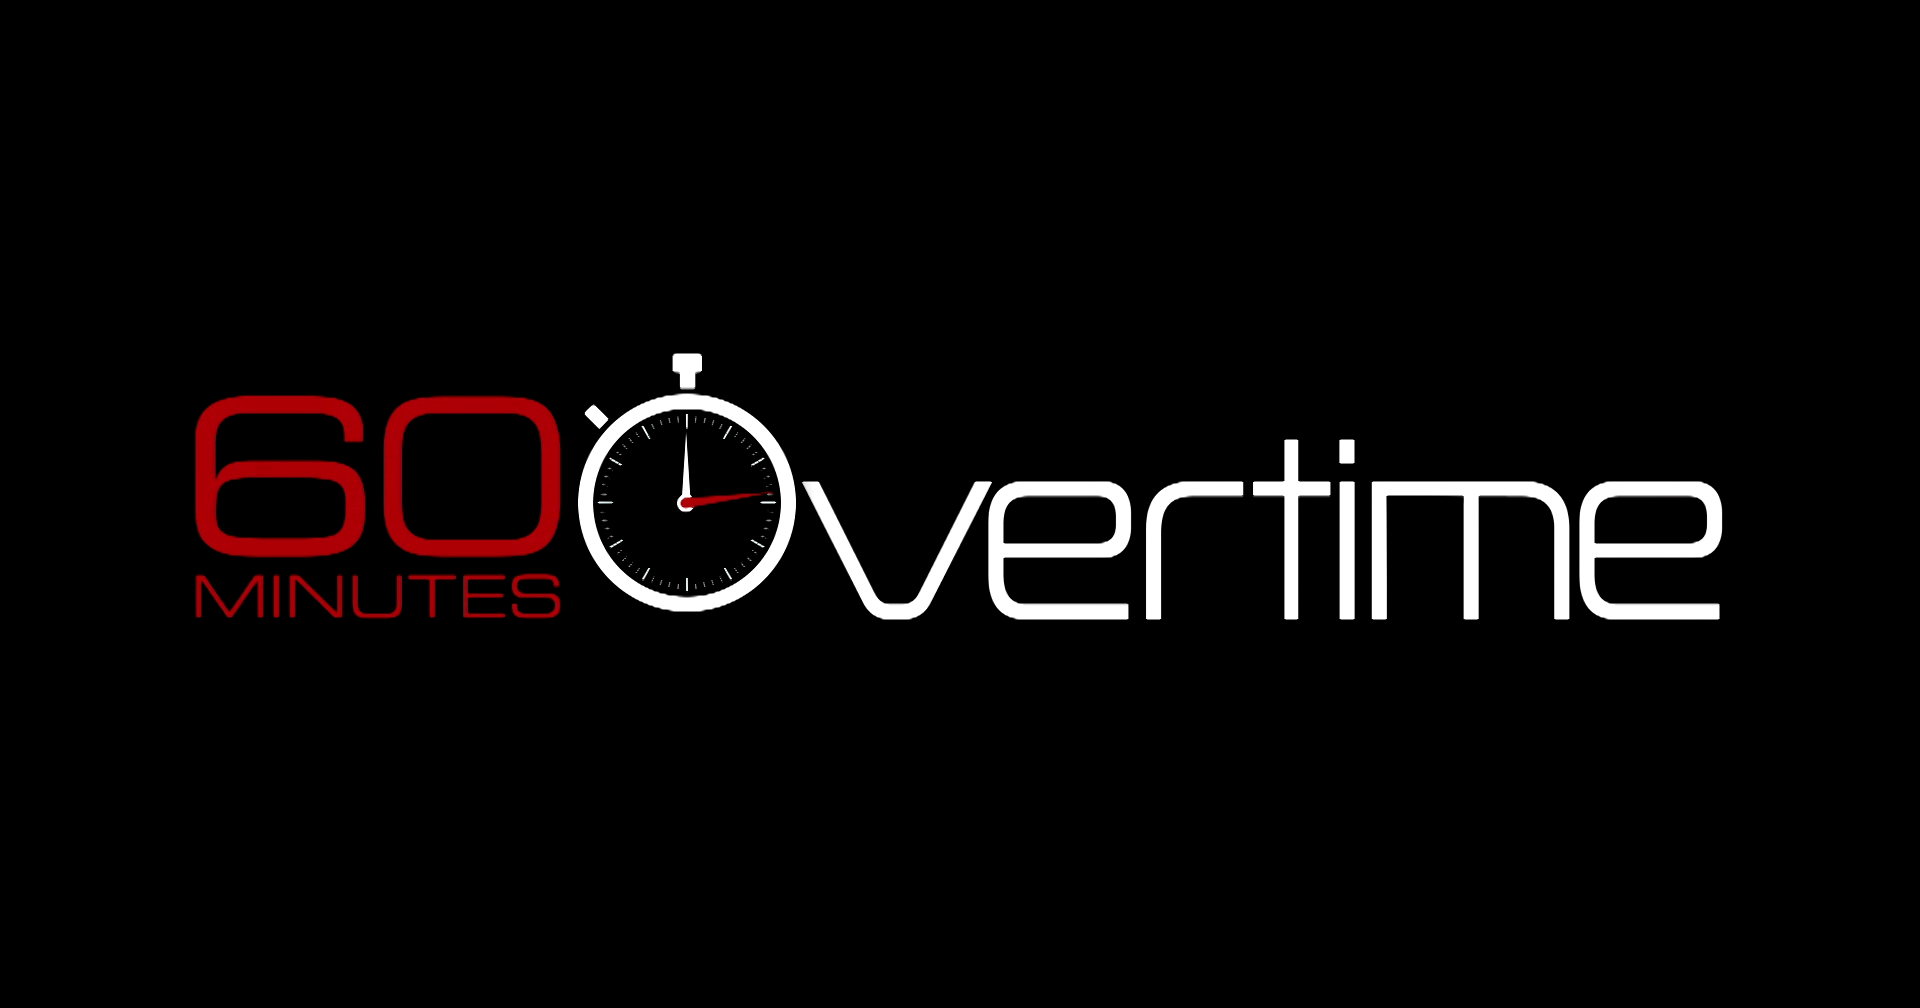 60 Minutes Overtime Logo